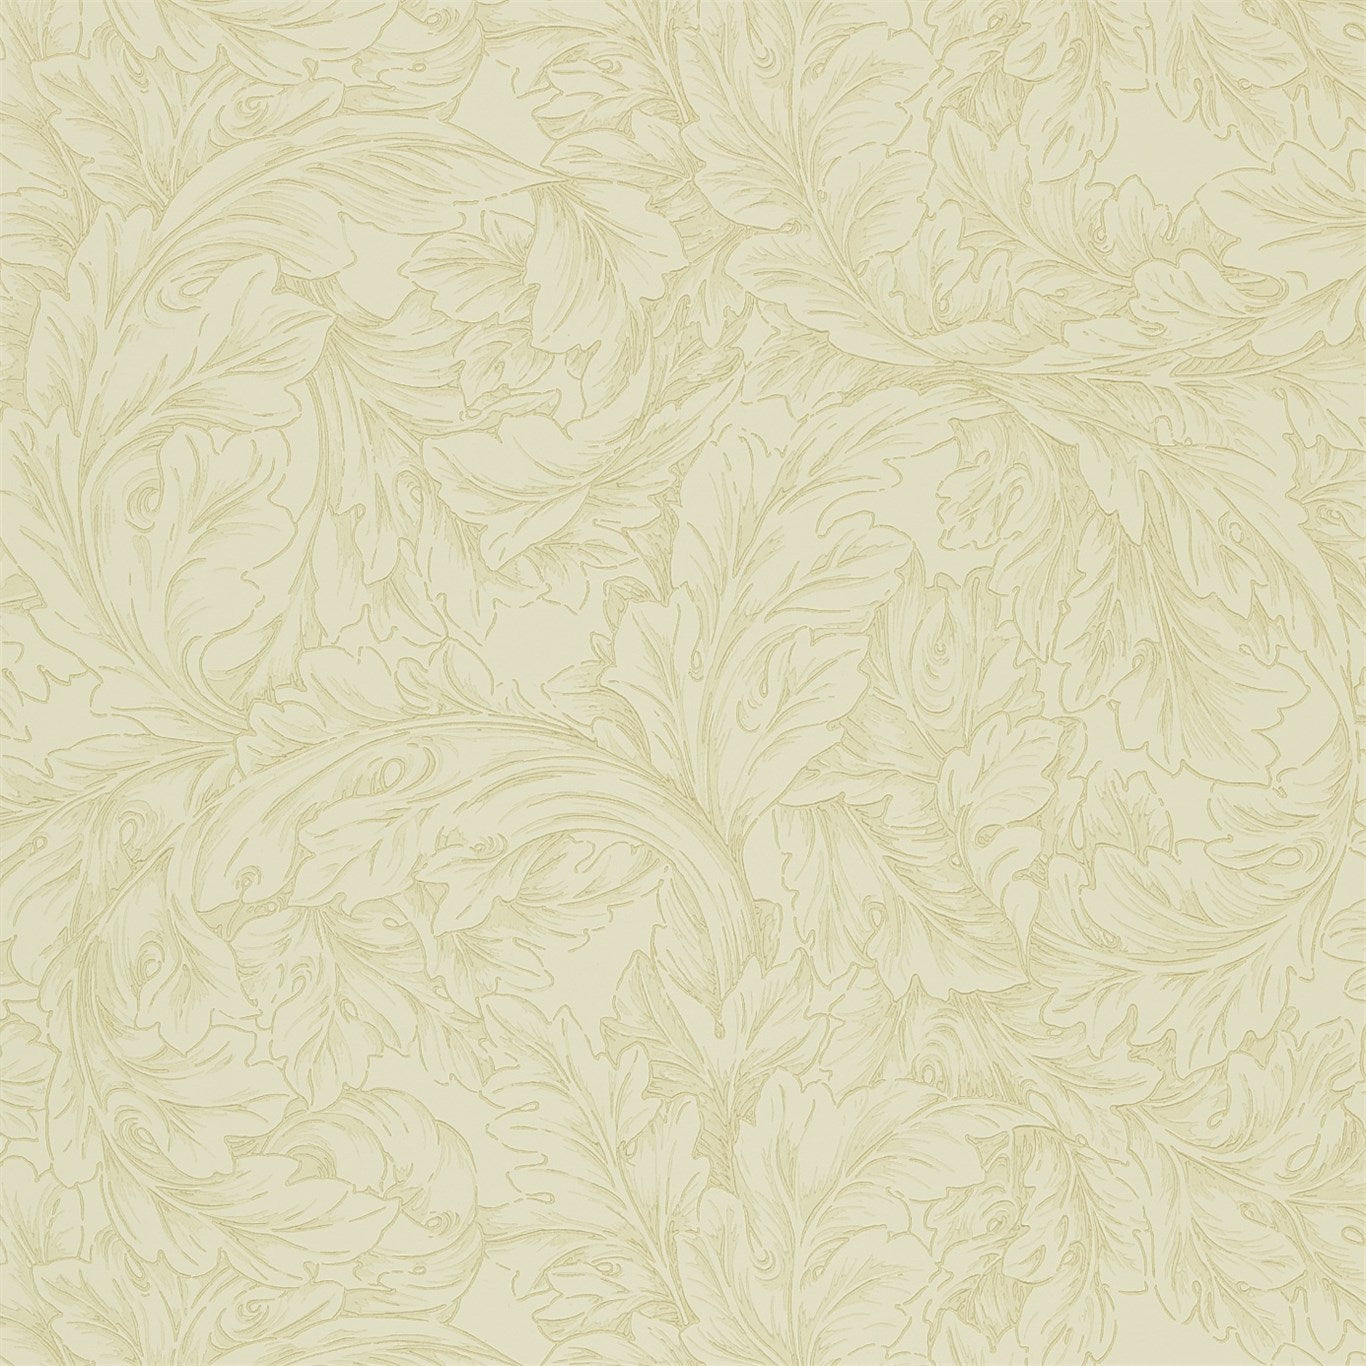 Acanthus Scroll Wallpaper DMCW210404 by Morris & Co